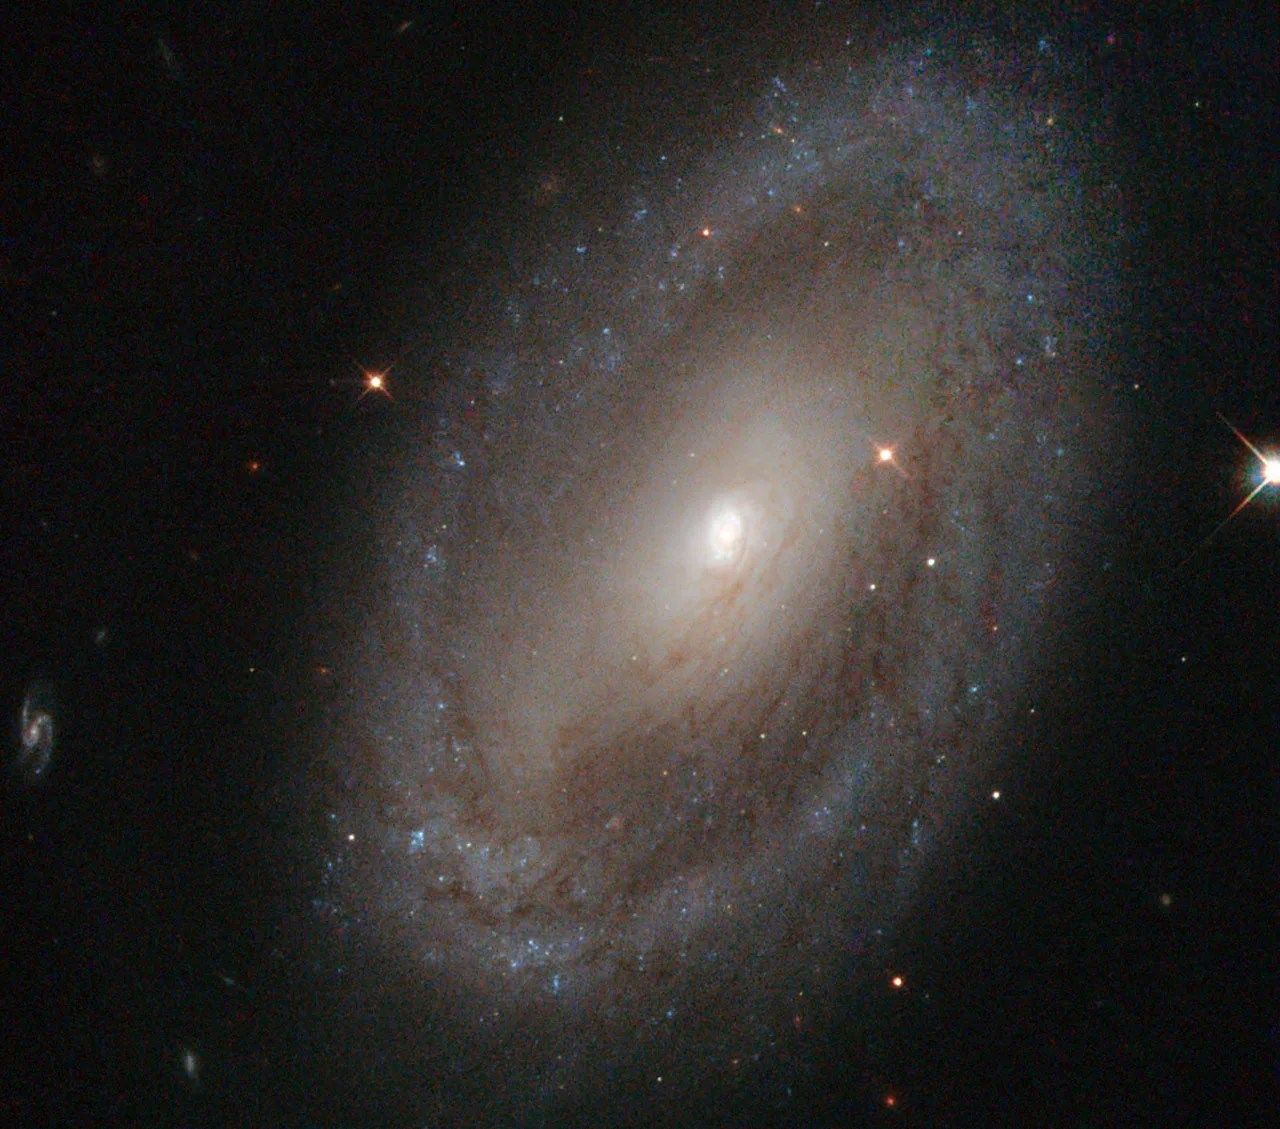 Large spiral galaxy from above with bright light in center